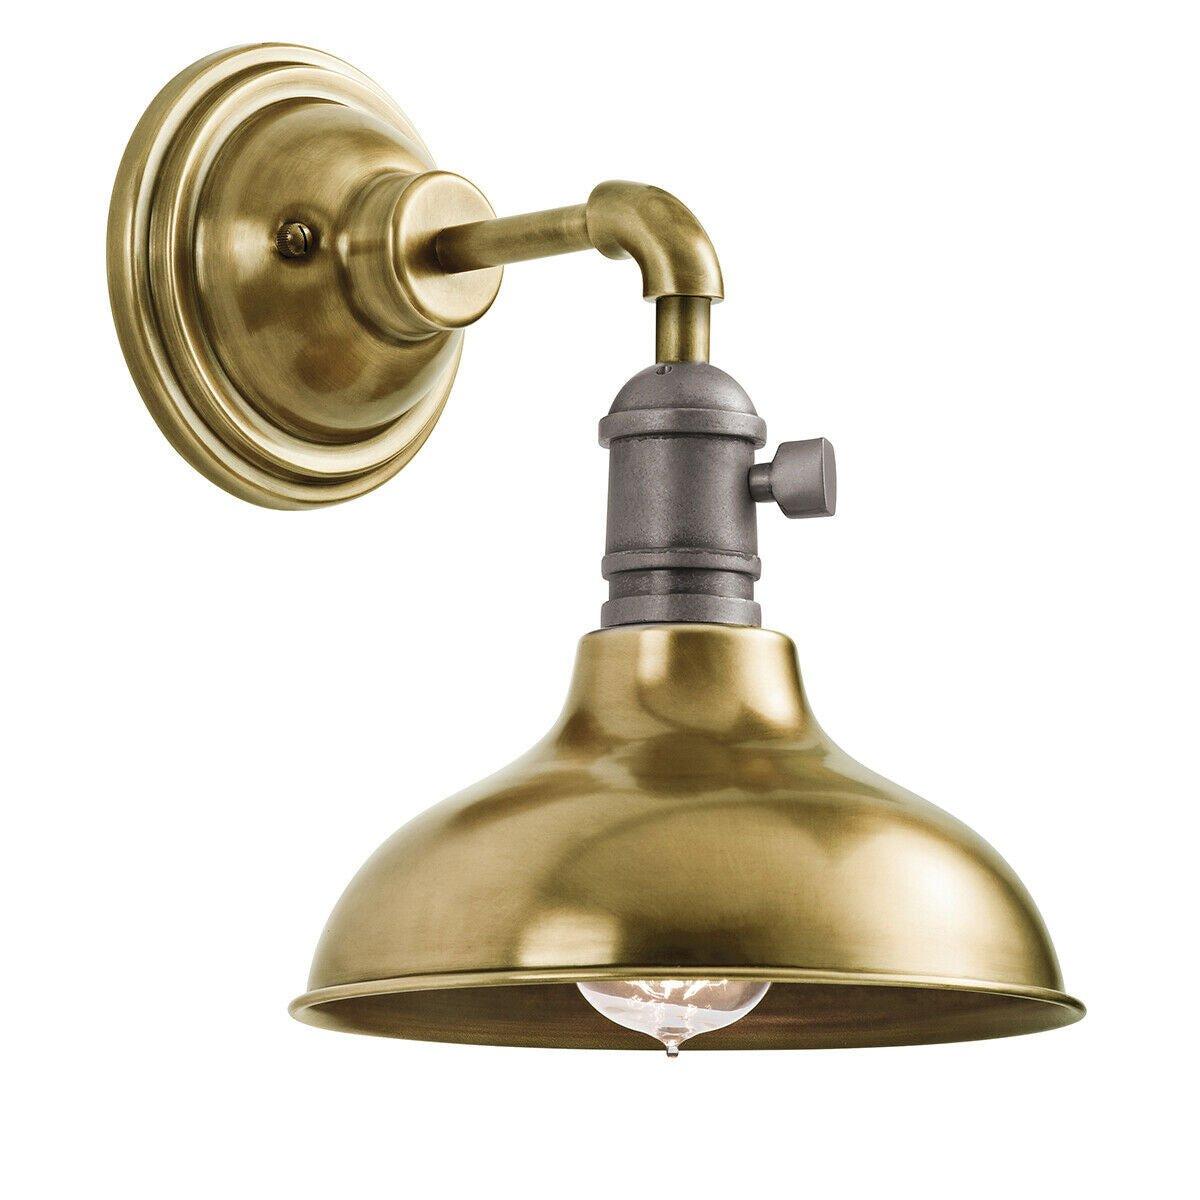 Wall Light Retro Industrial Wide Bell Downlighter Shade Brass LED E27 60W